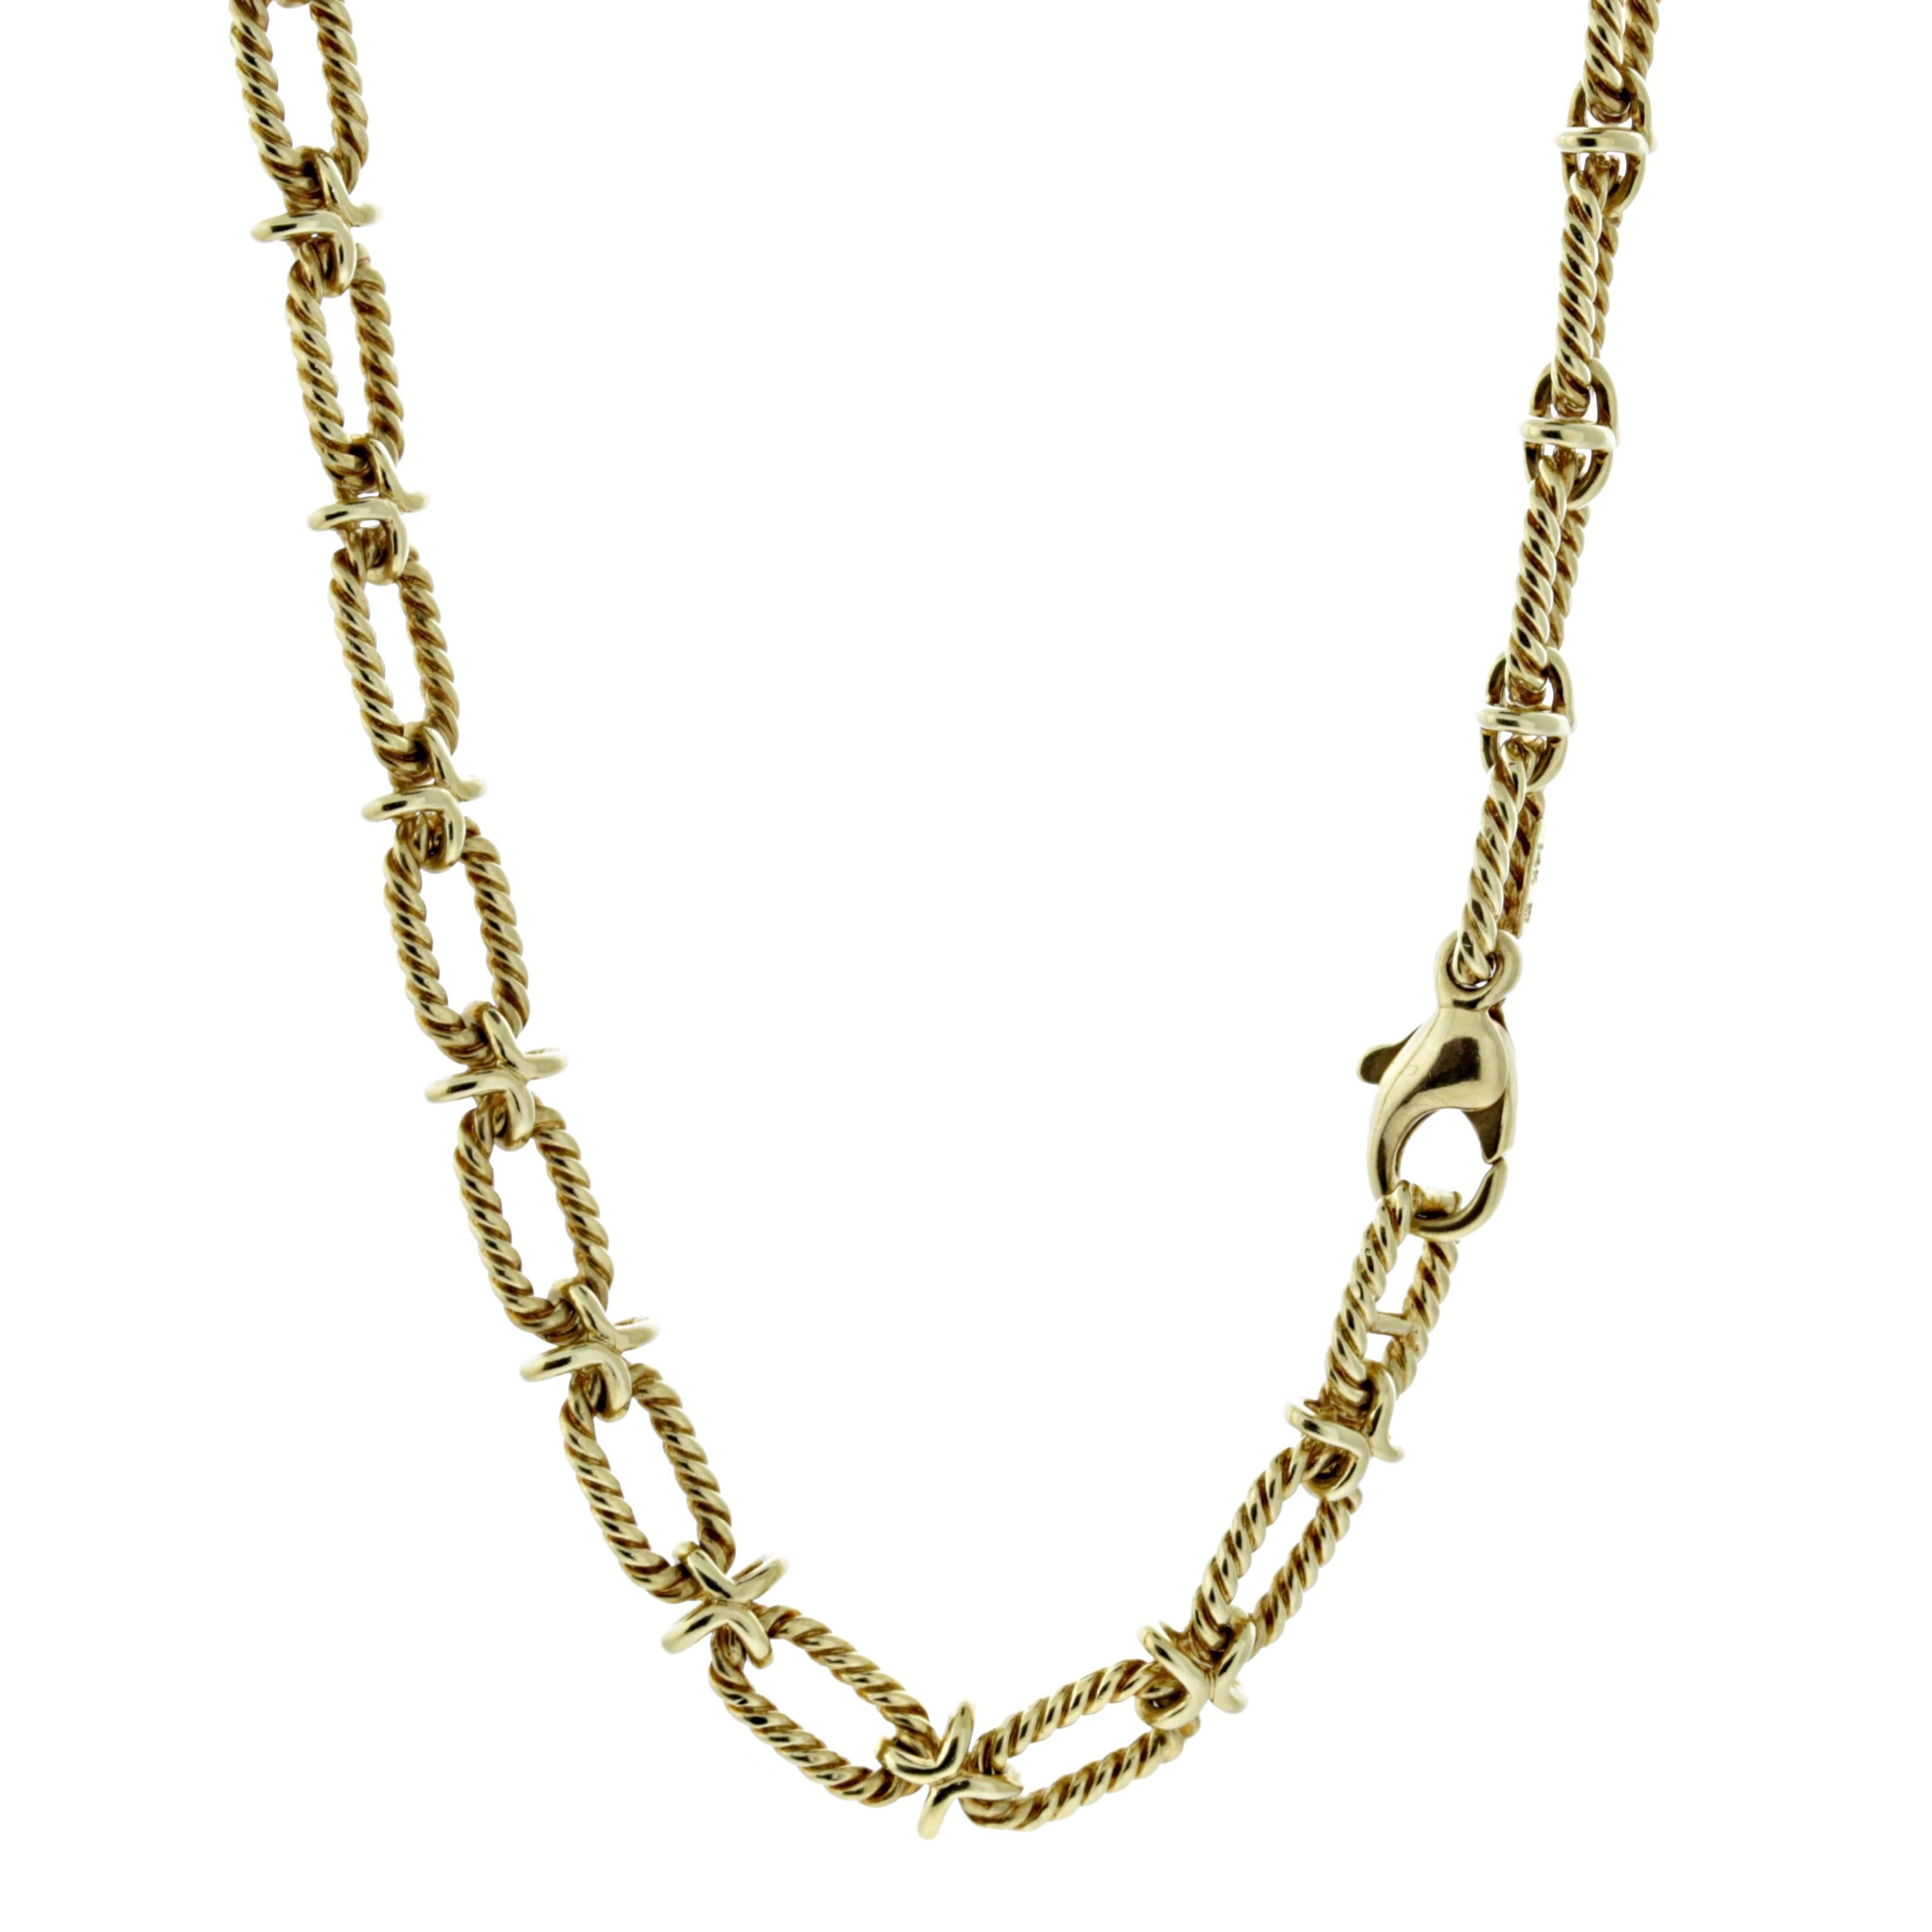 A unique Tiffany & Co Sautoir necklace featuring a braided design crafted in 18k yellow gold. The necklace may be worn as a sautoir or doubled as a choker.

Necklace Length: 30"